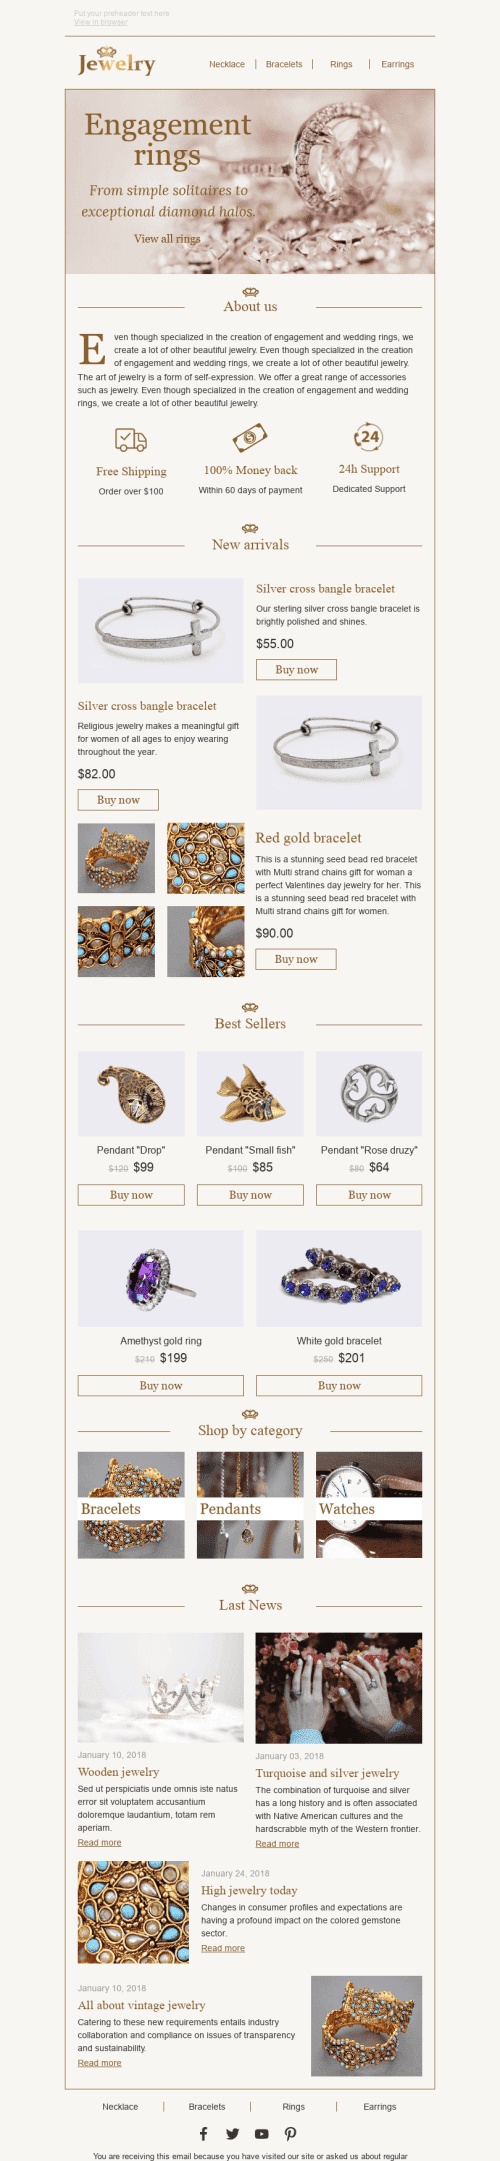 Promo Email Template "Red Gold" for Jewelry industry desktop view